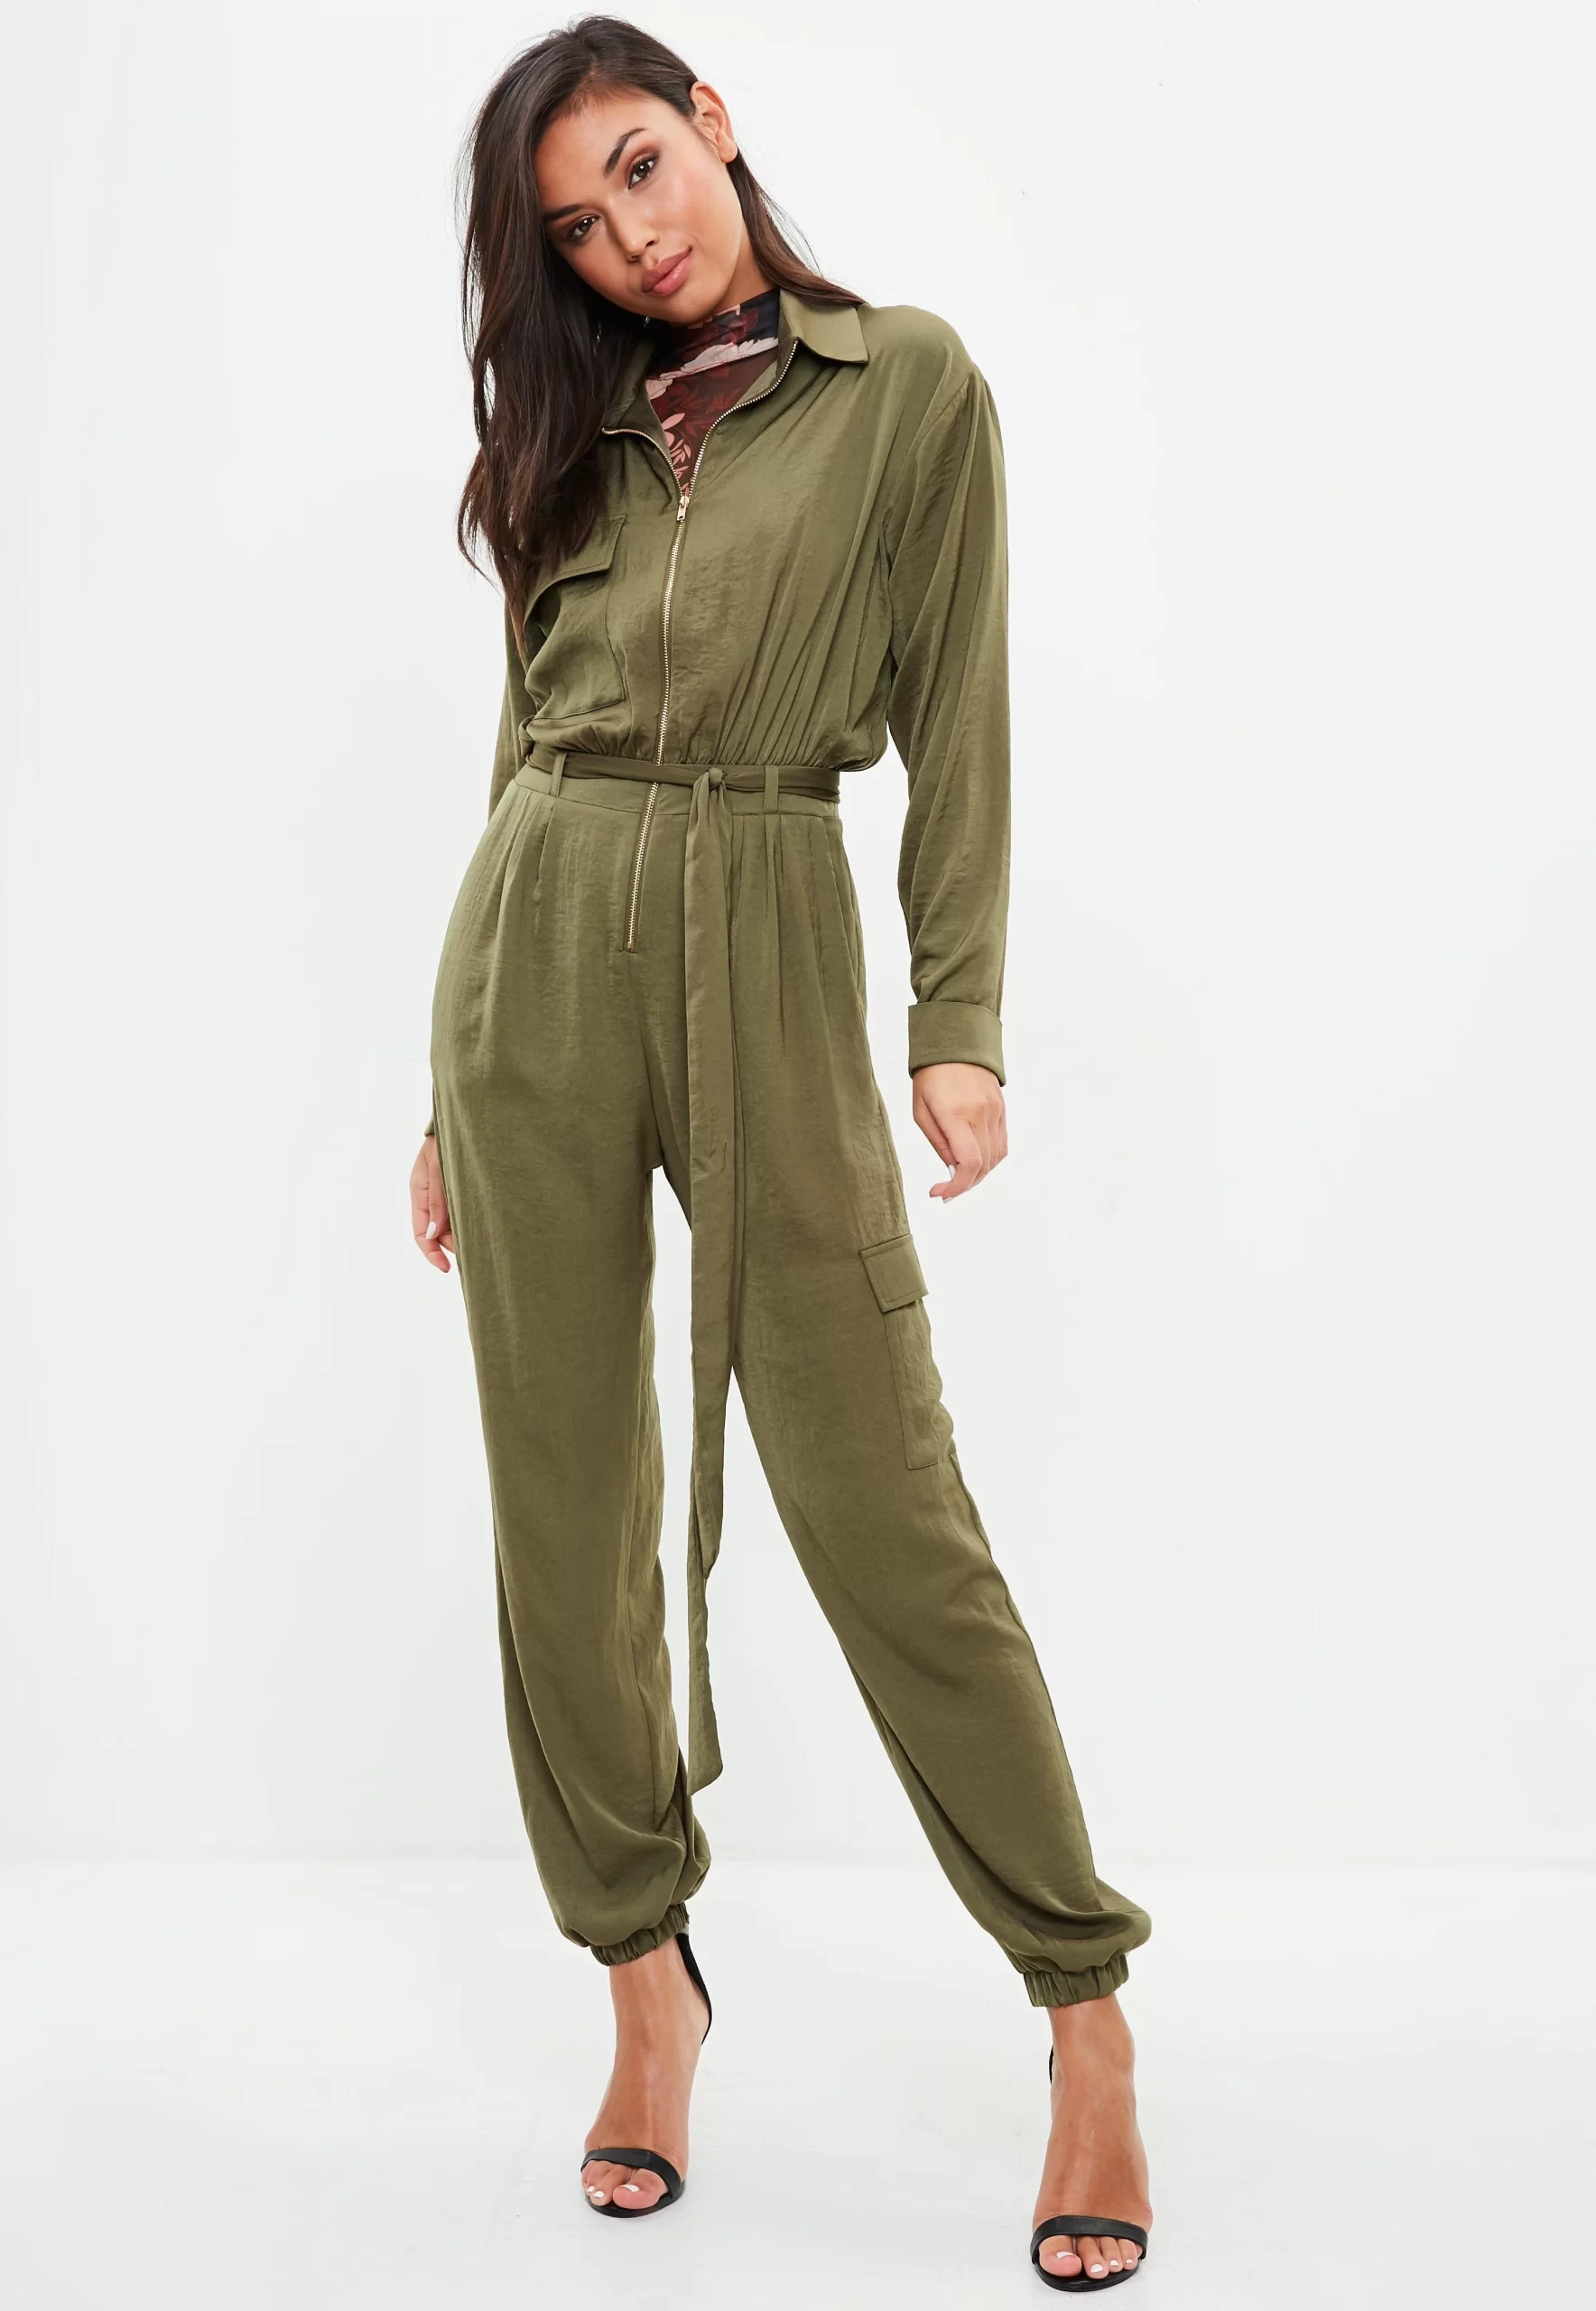 “Jumpsuit Joy: Embracing Comfort and Style in One Piece”